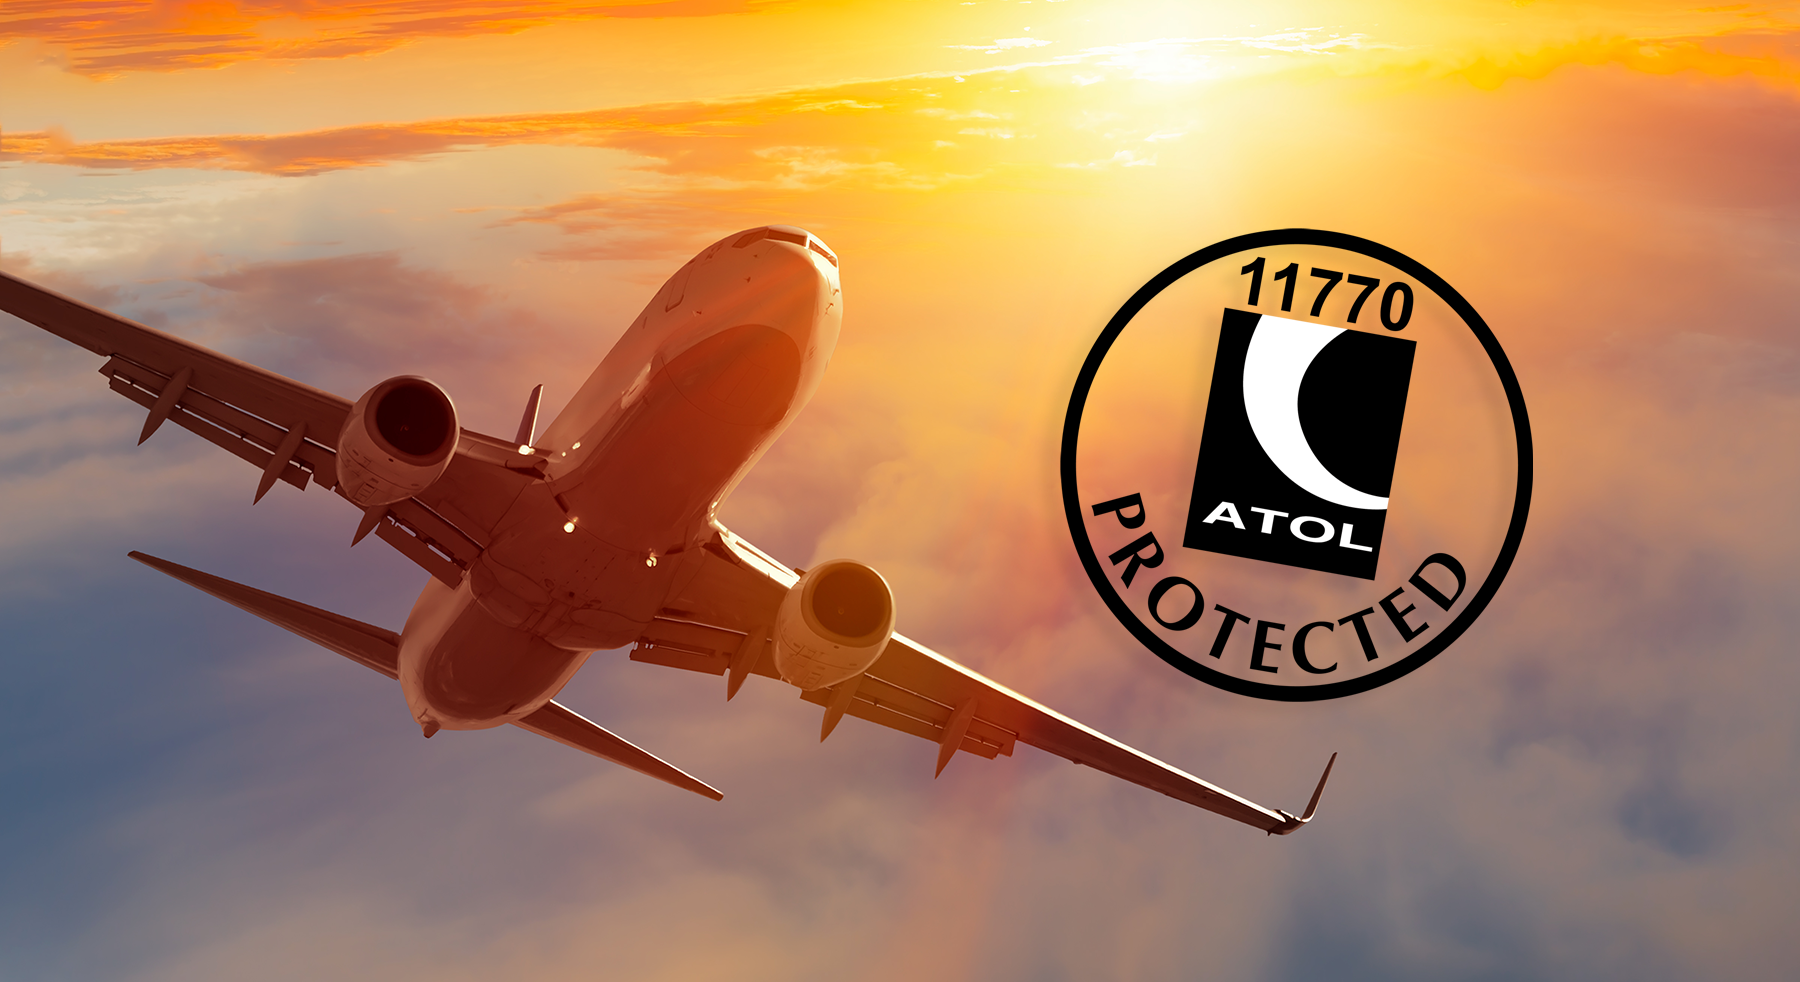 https://merlintravelgroup.com/wp-content/uploads/2022/09/ATOL-Protected.png